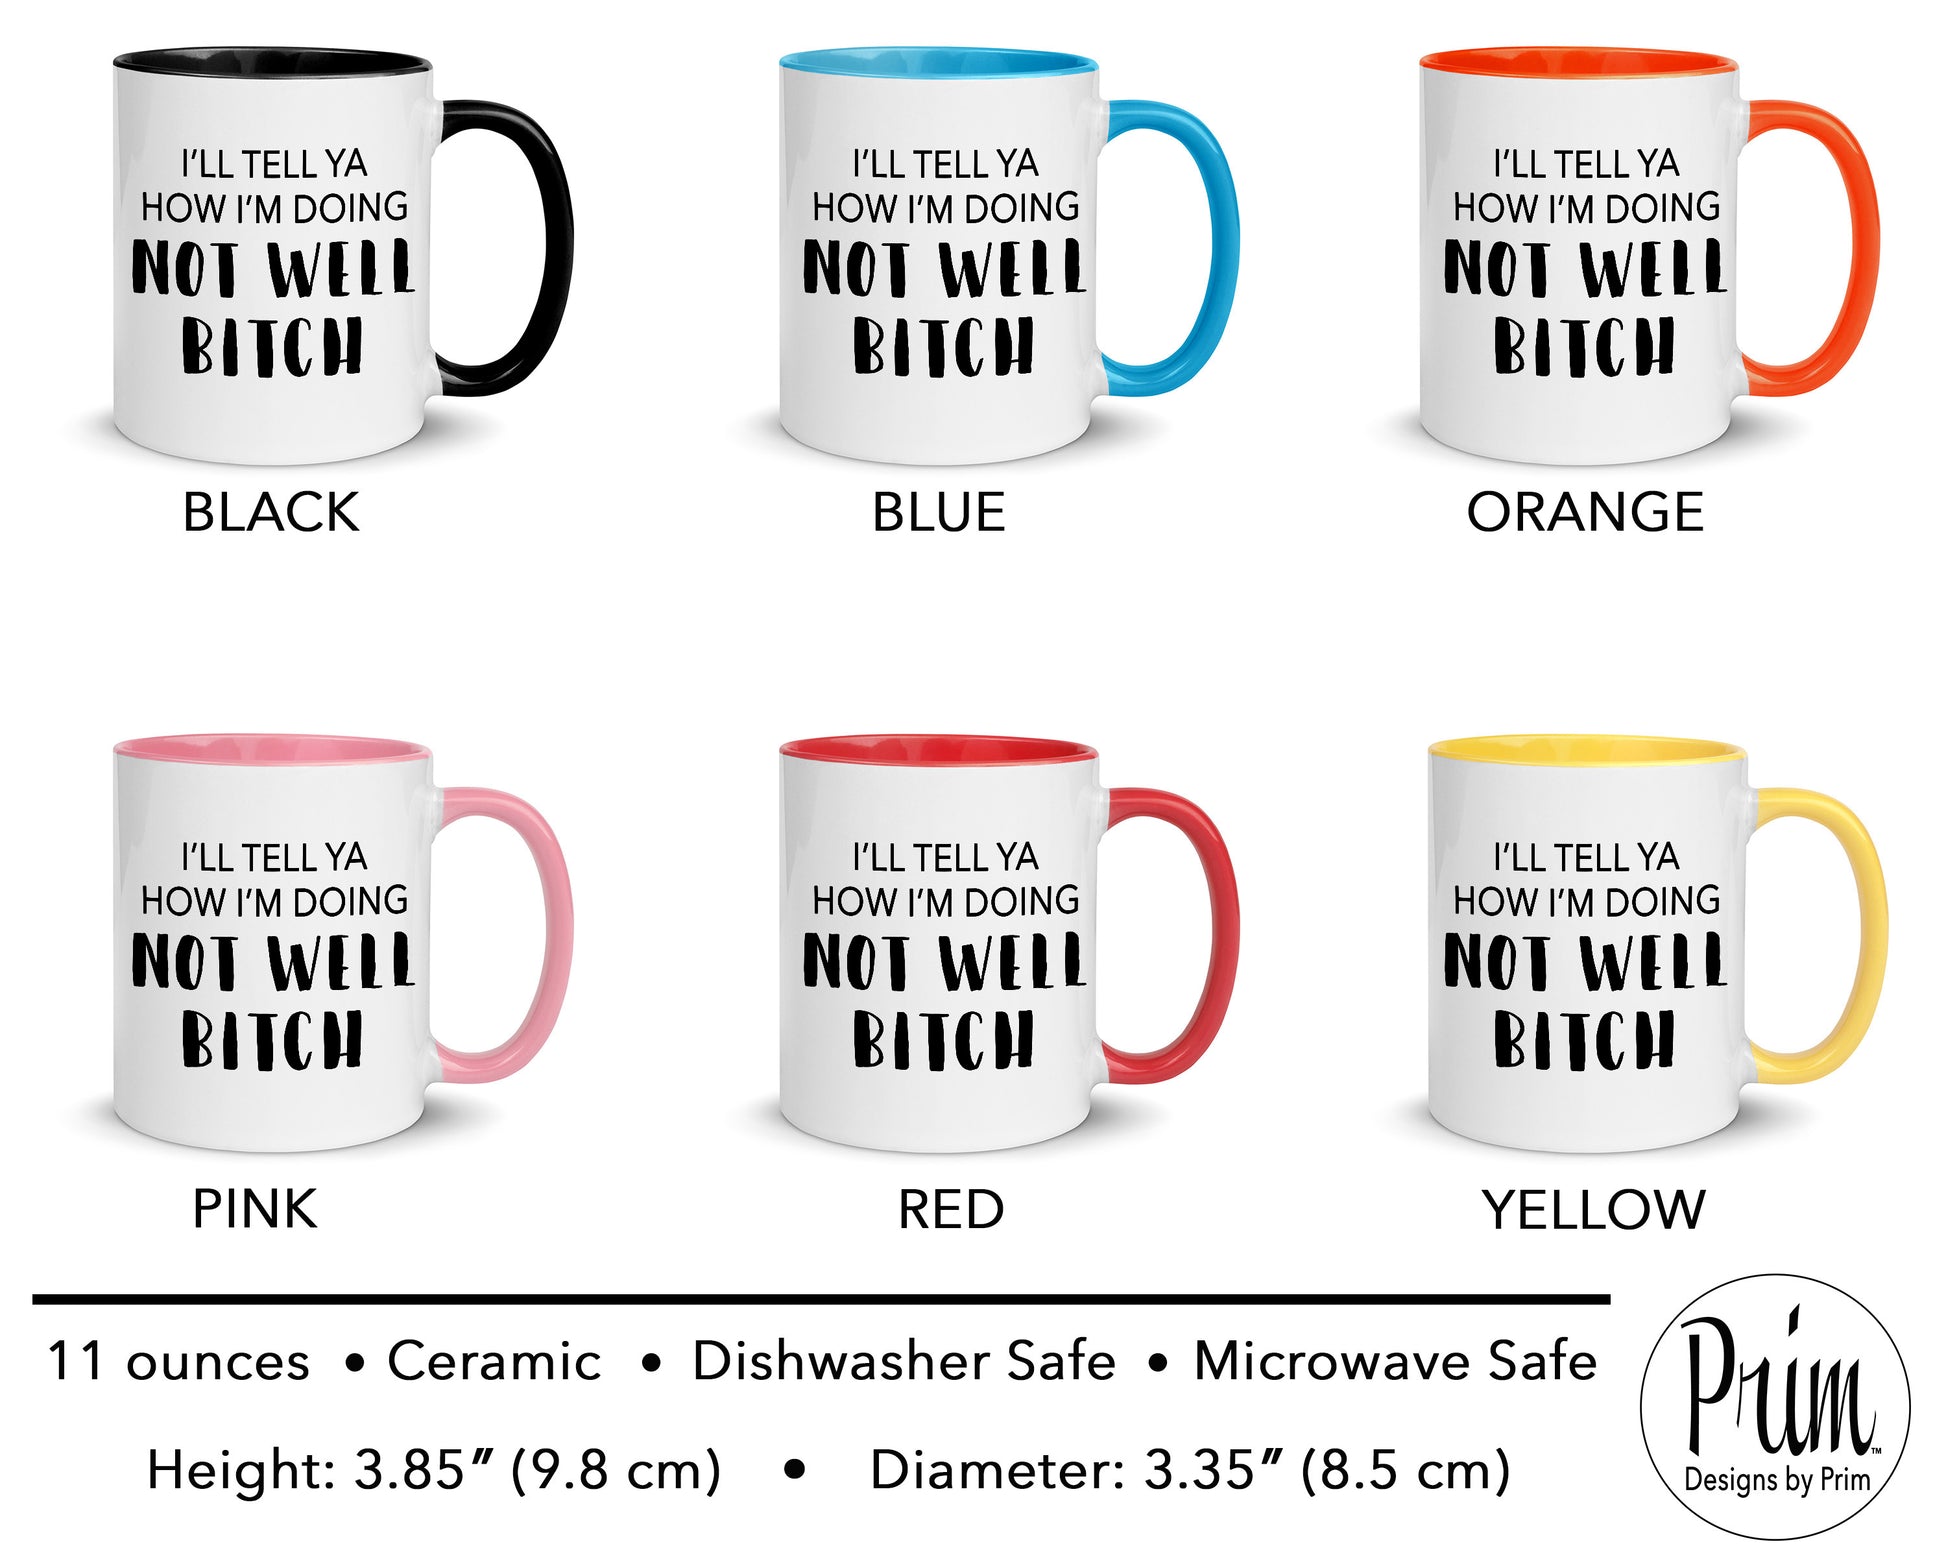 Designs by Prim I'll Tell Ya How I'm Doing Not Well Bitch Dorinda Medley 11 Ounce Ceramic Mug | RHONY Real Housewives Funny Quote Saying Tea Coffee Cup